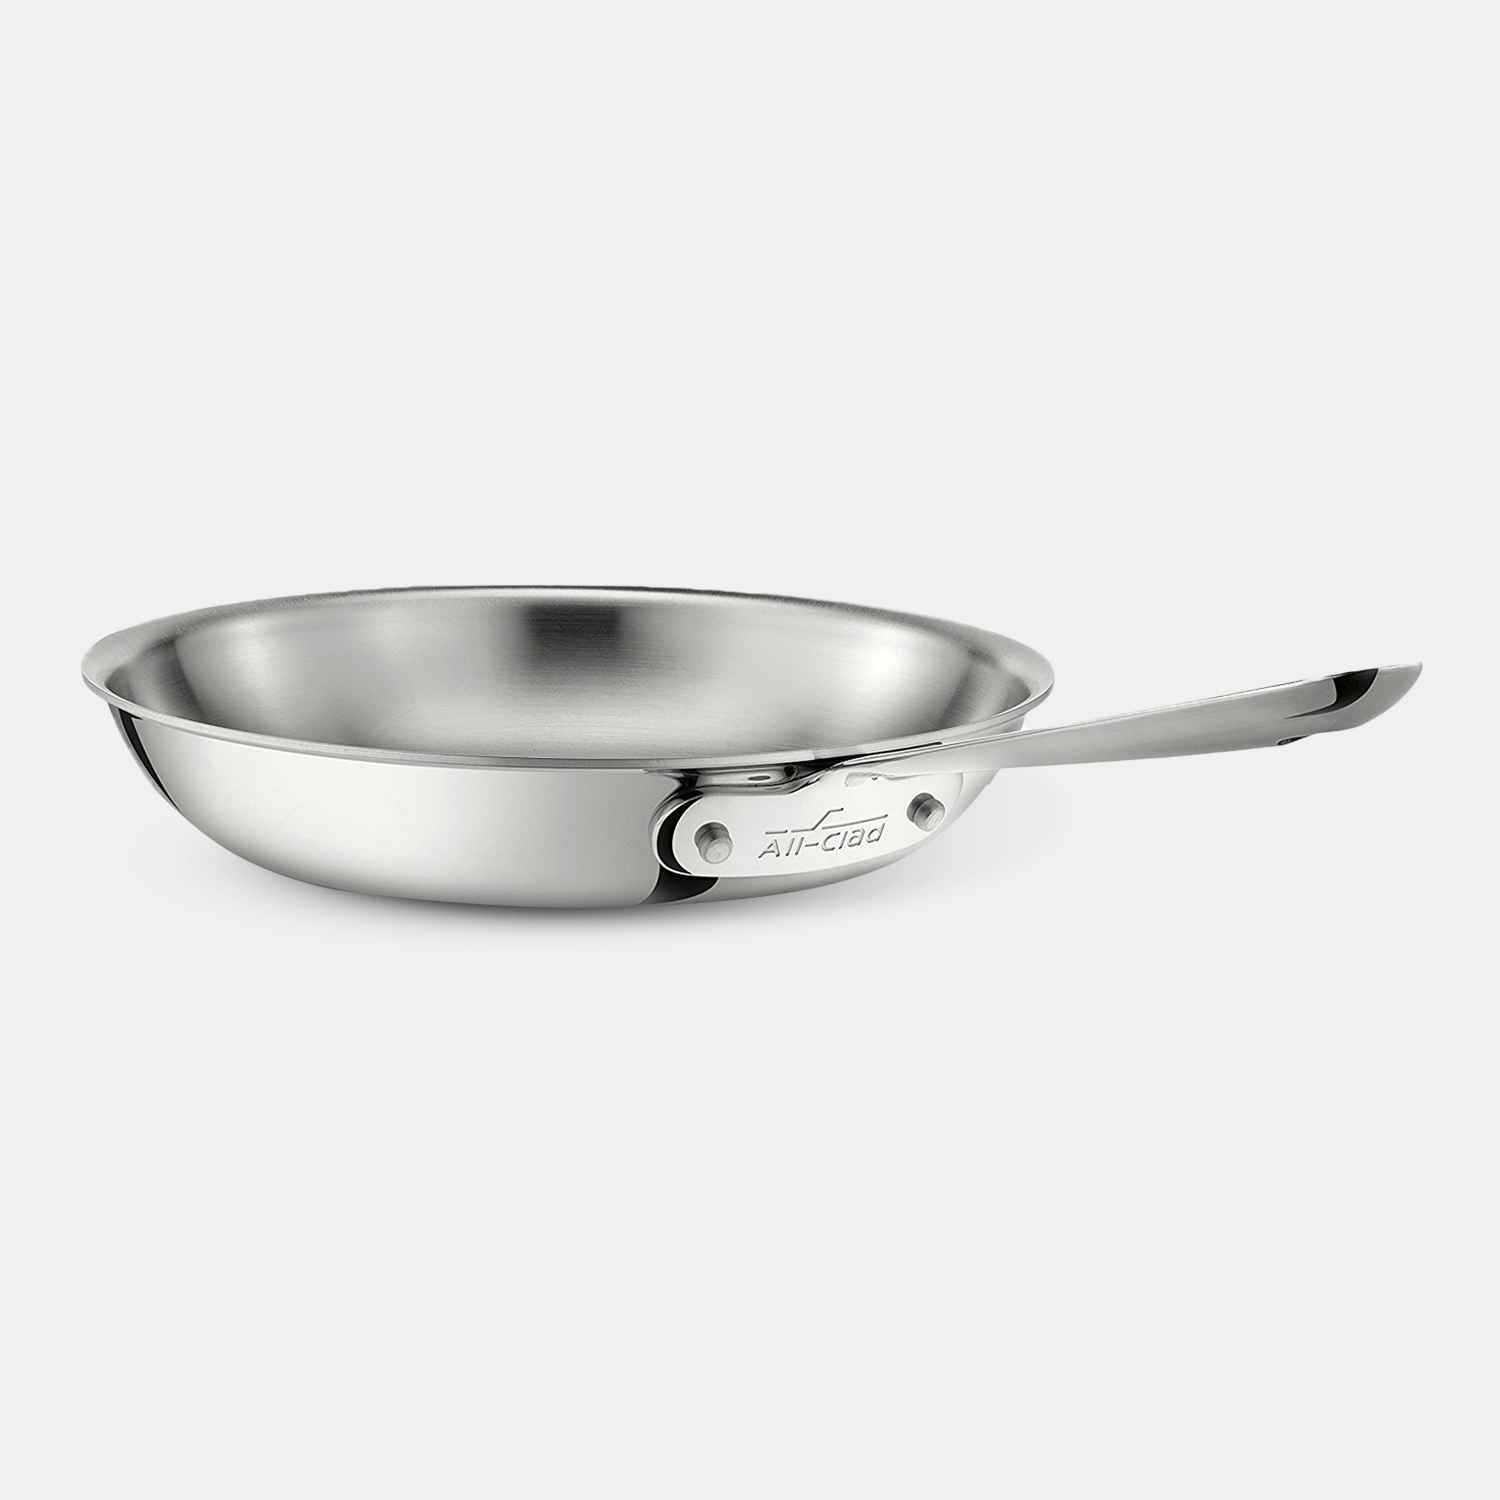 All-Clad Stainless Steel 12-Inch Fry Pan | Price & Reviews | Drop All Clad Stainless Steel 12 Inch Fry Pan